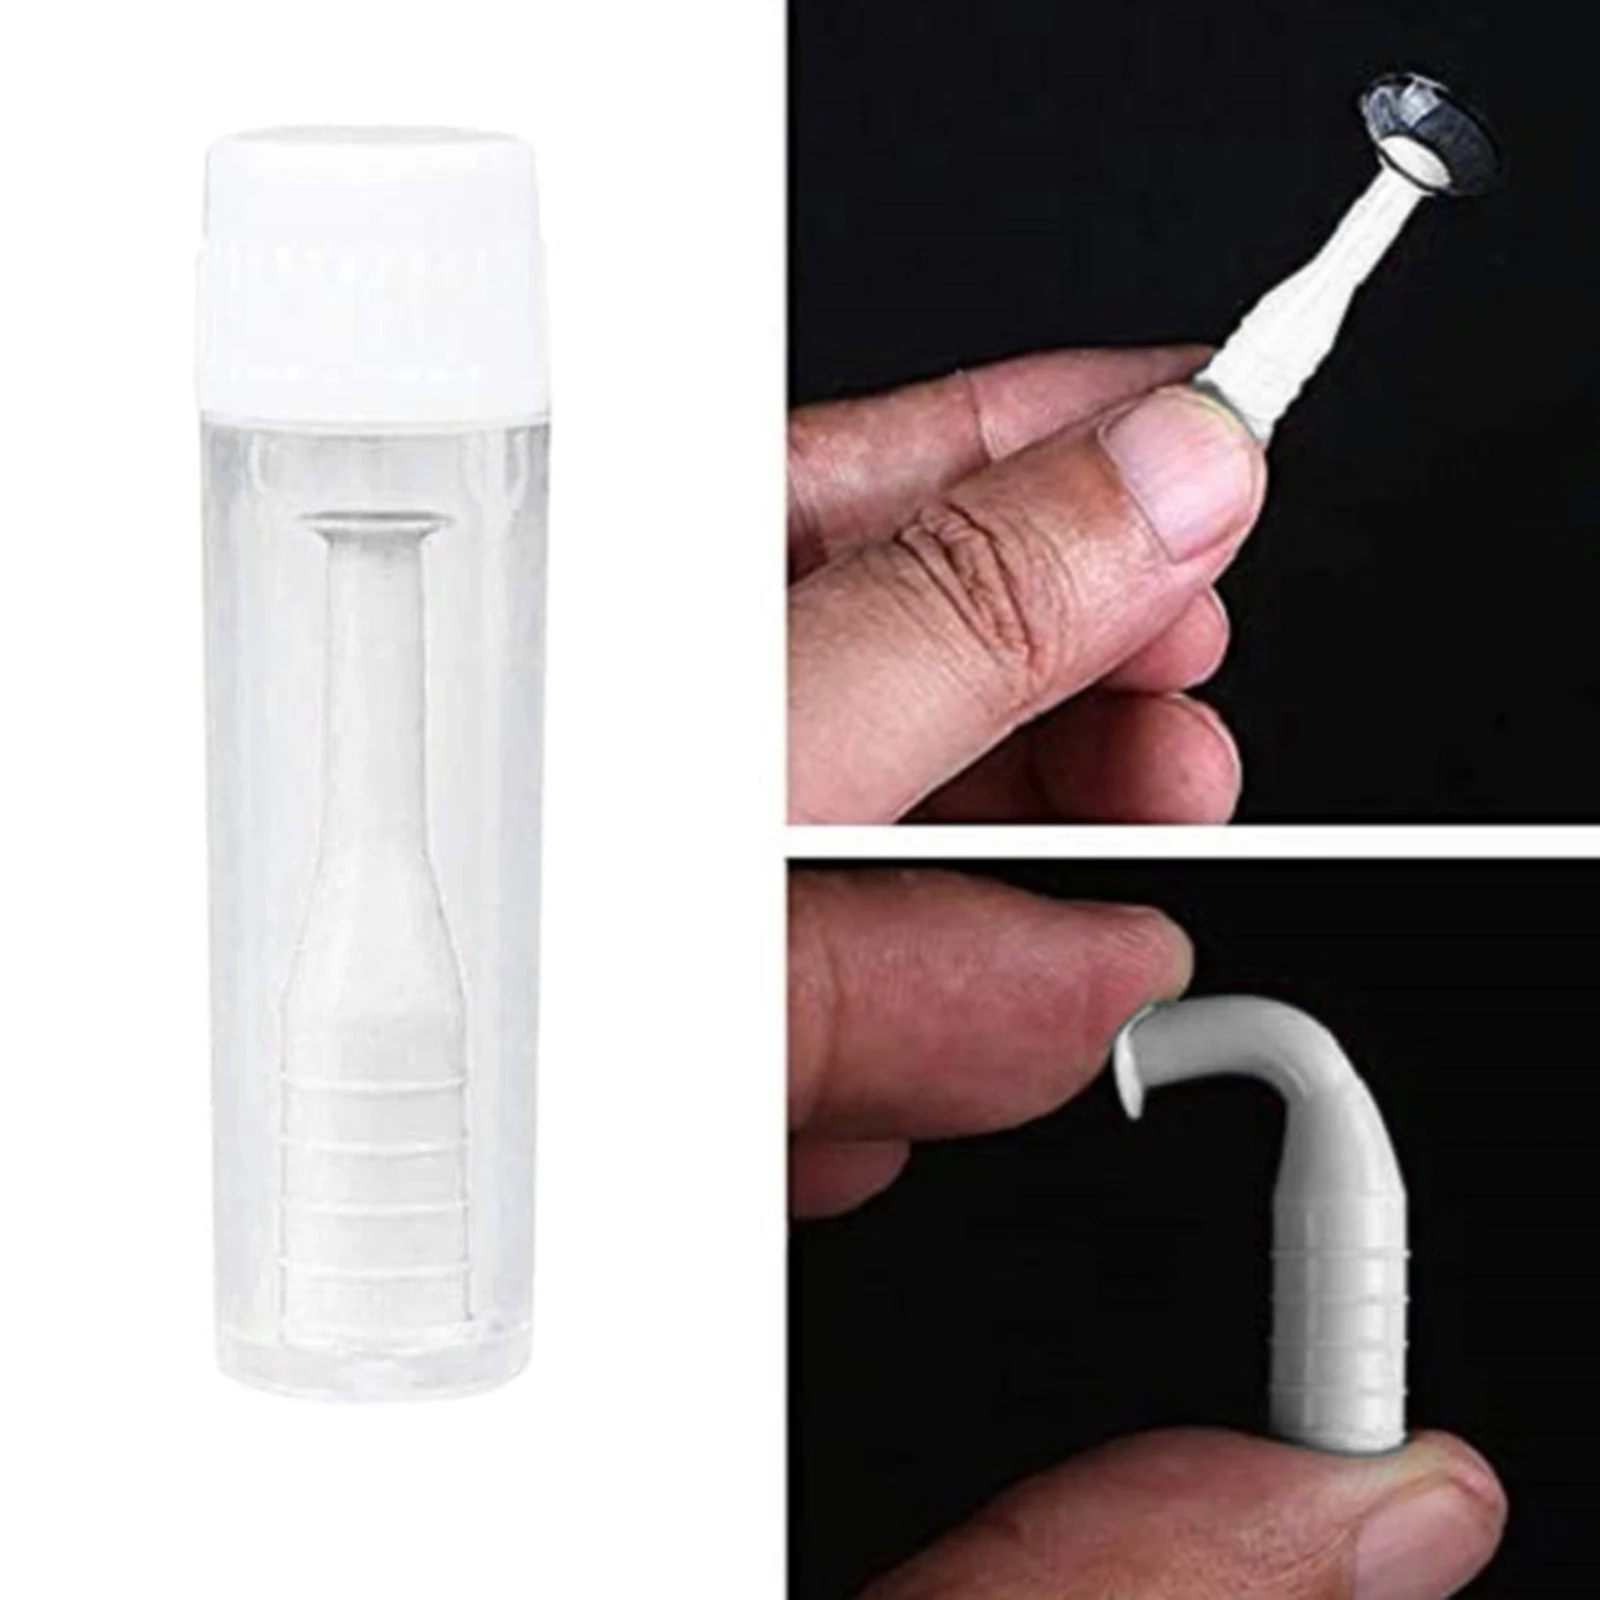 Hard Contact Lens Remover Insertion Tool Plunger Extractor Device for Soft Hard Lenses